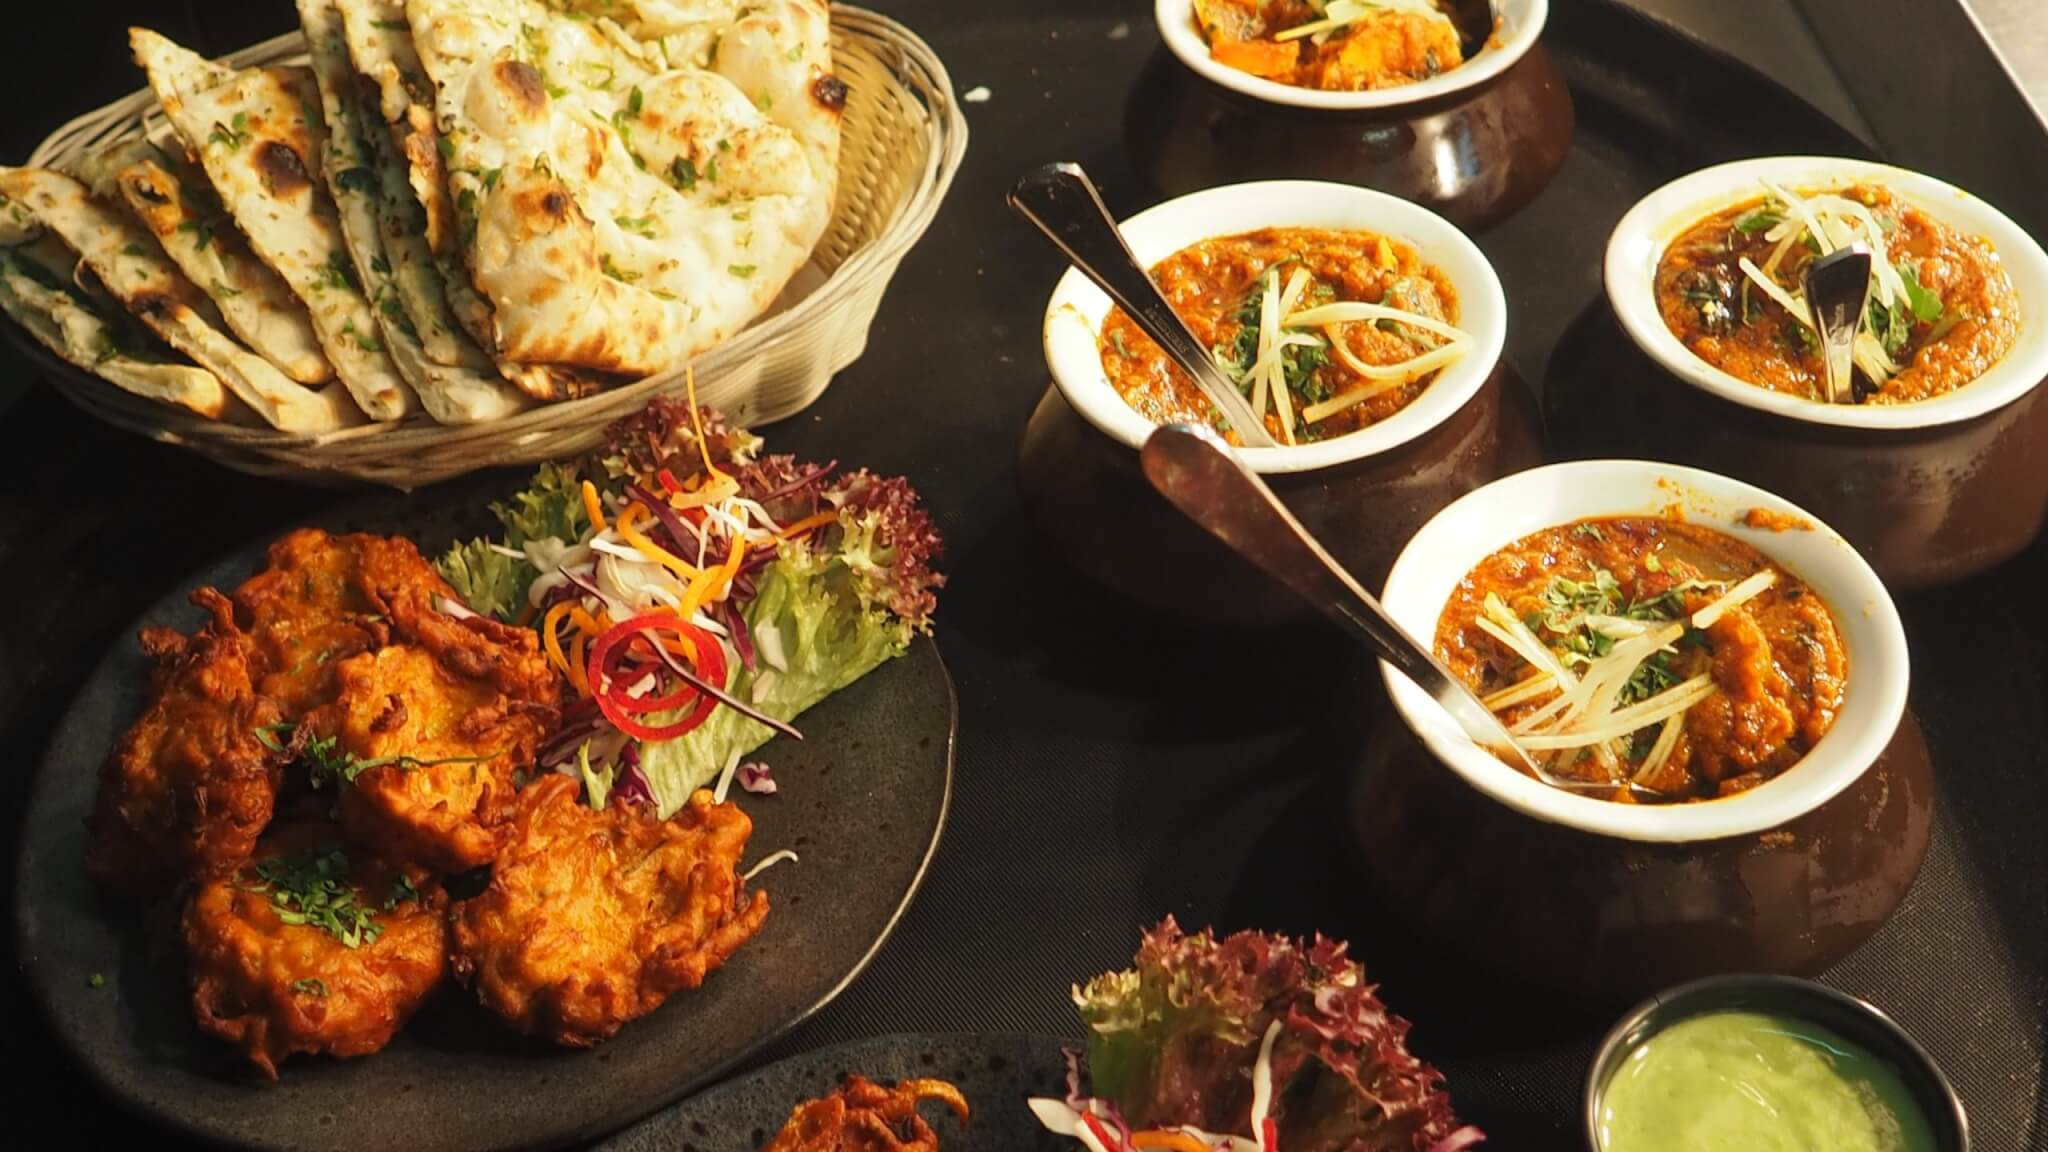 Mistakes to Avoid When Dining at an Indian Restaurant